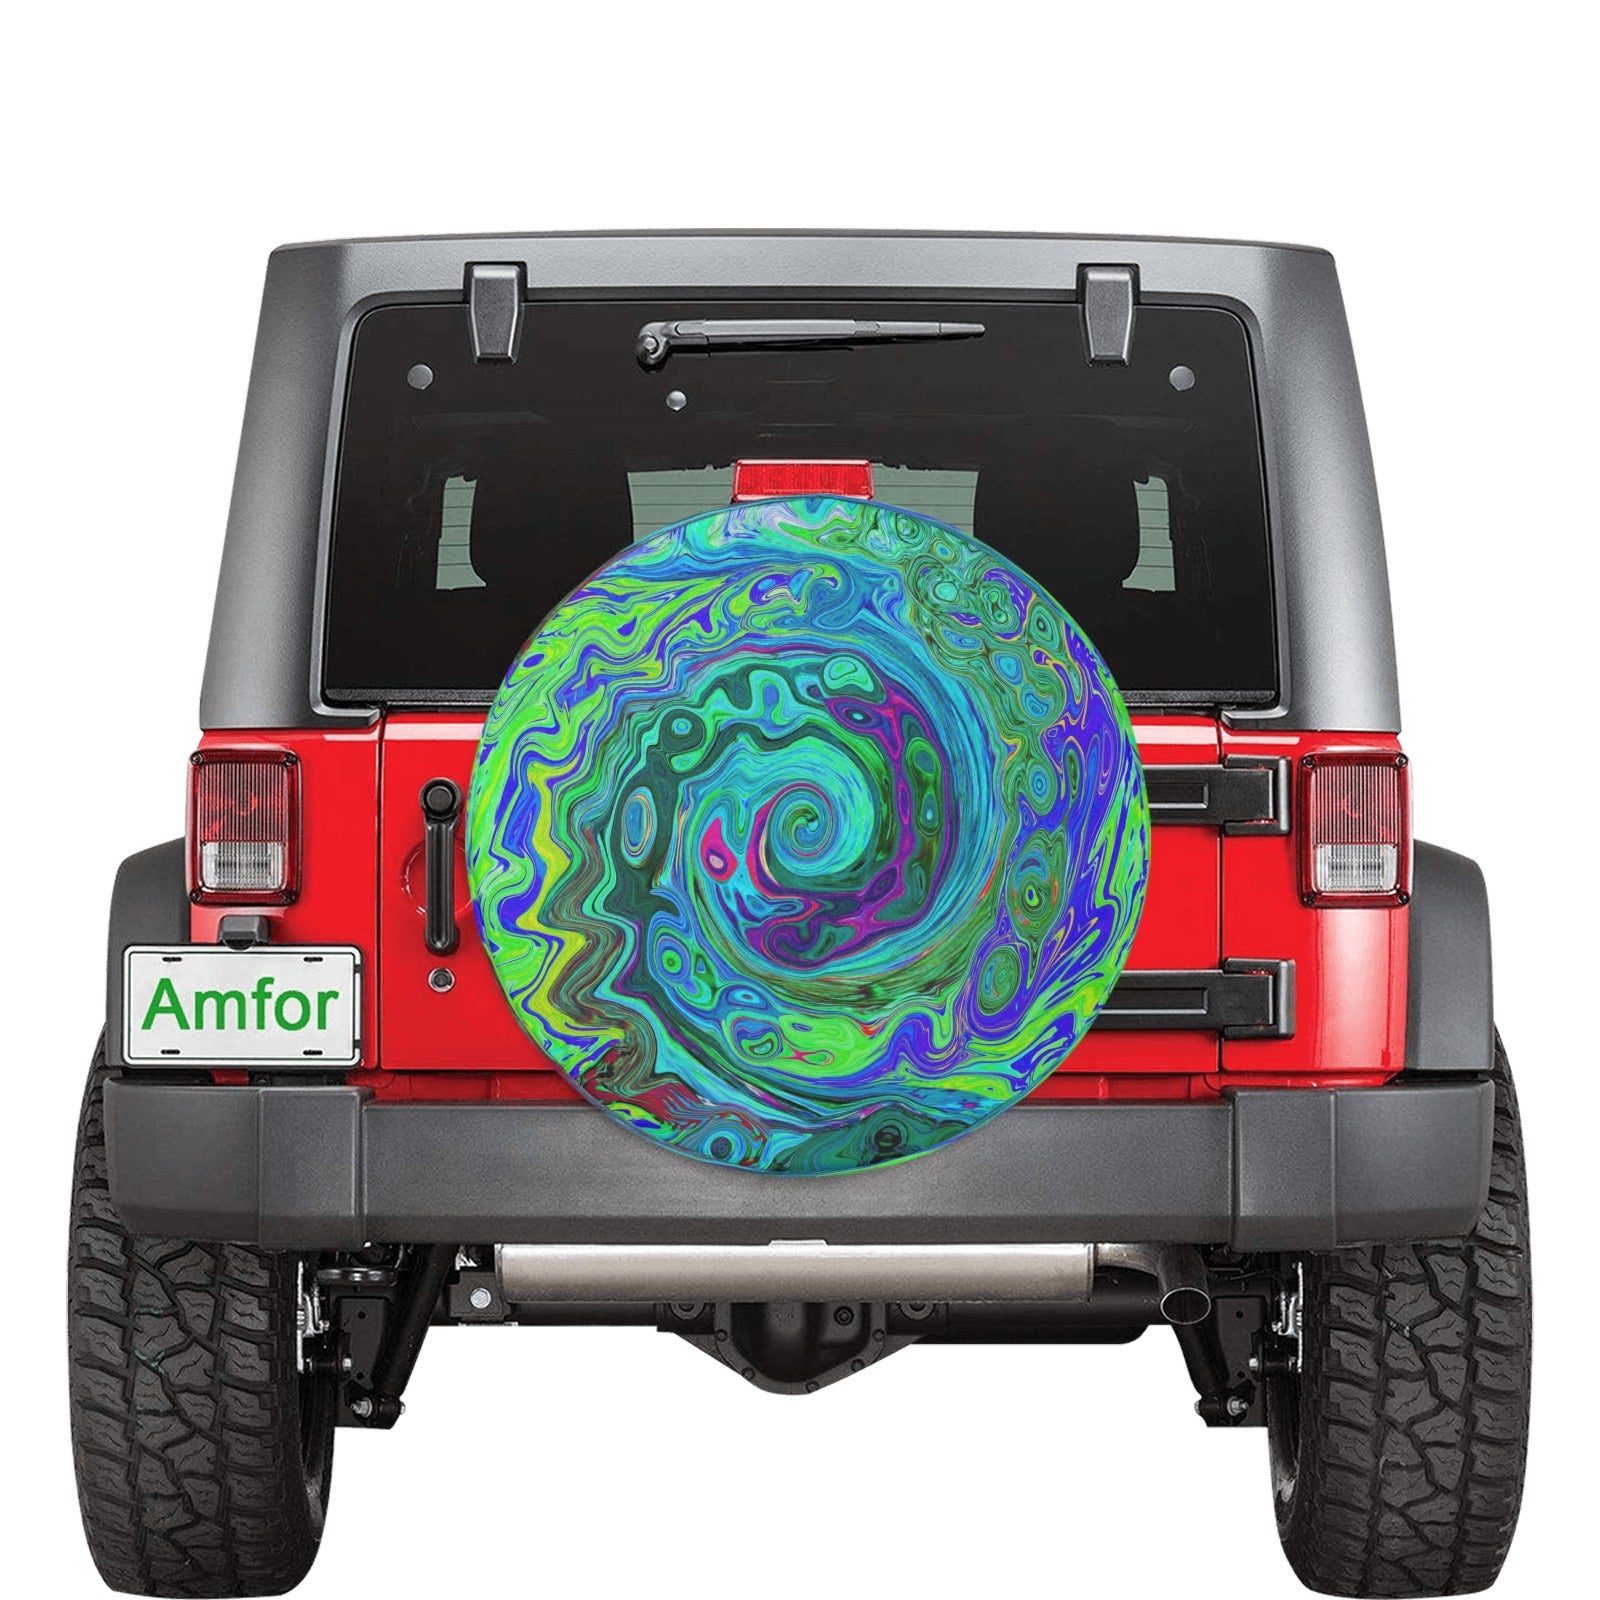 Spare Tire Covers, Groovy Abstract Retro Green and Blue Swirl - Medium